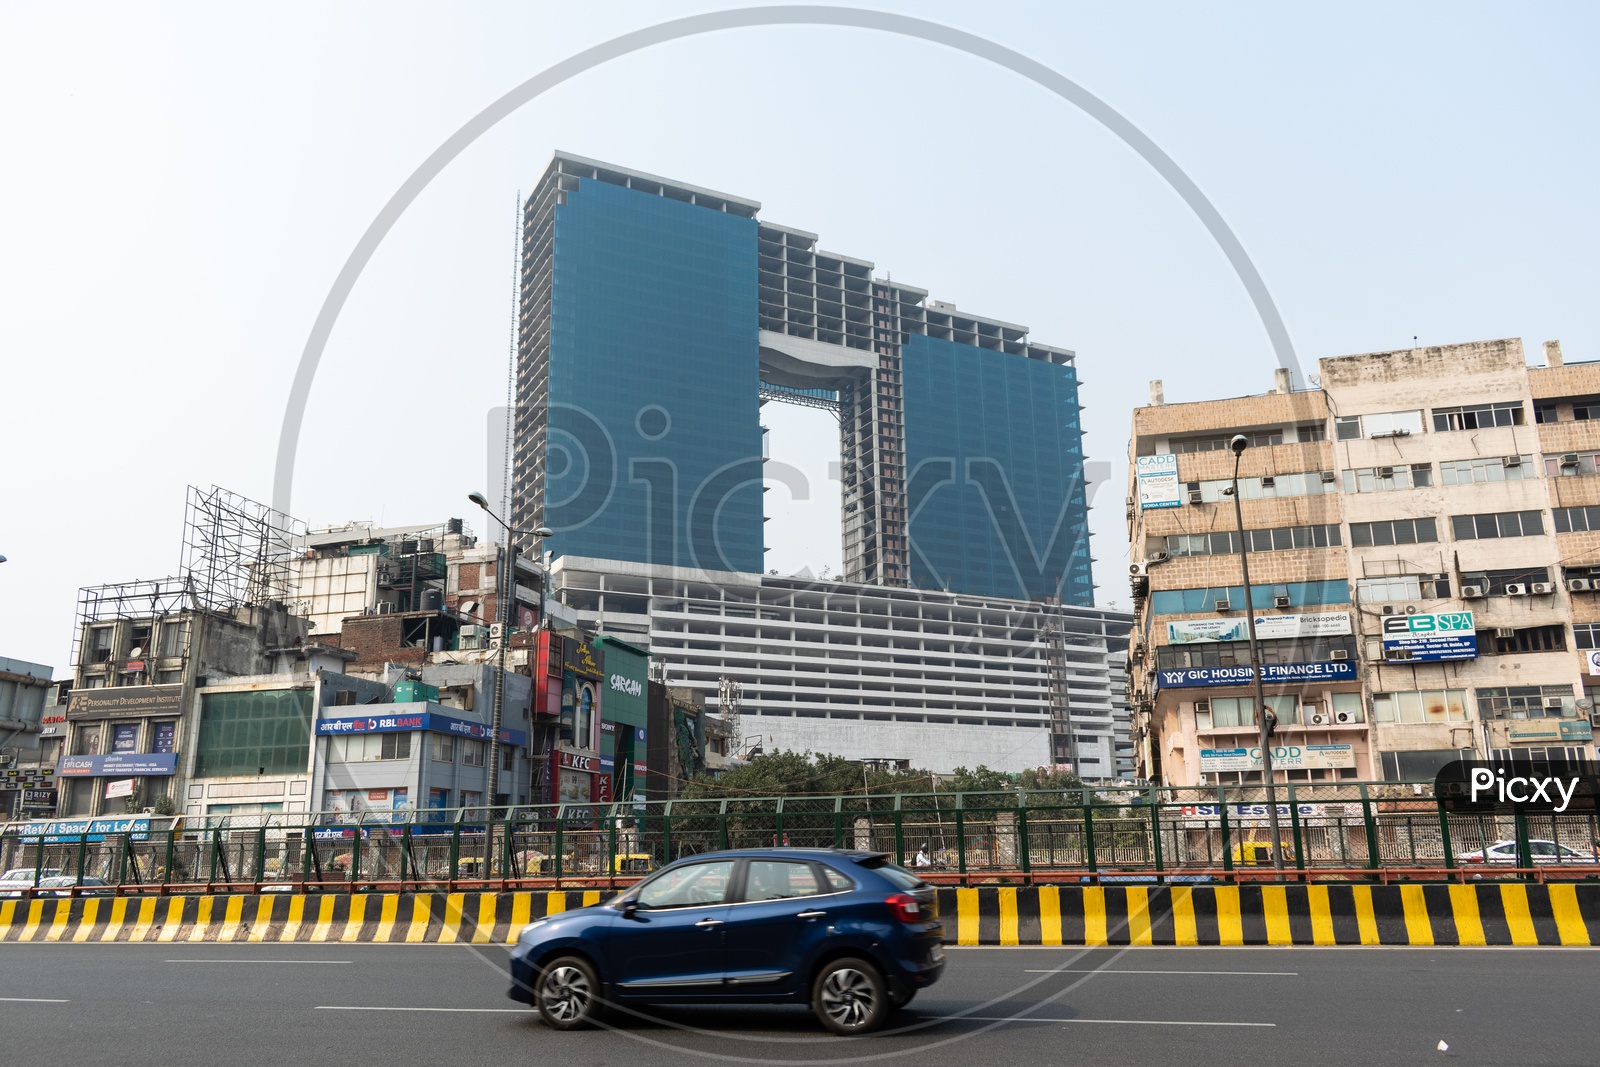 Wave one noida mall construction, other commercial building nearby and a moving car